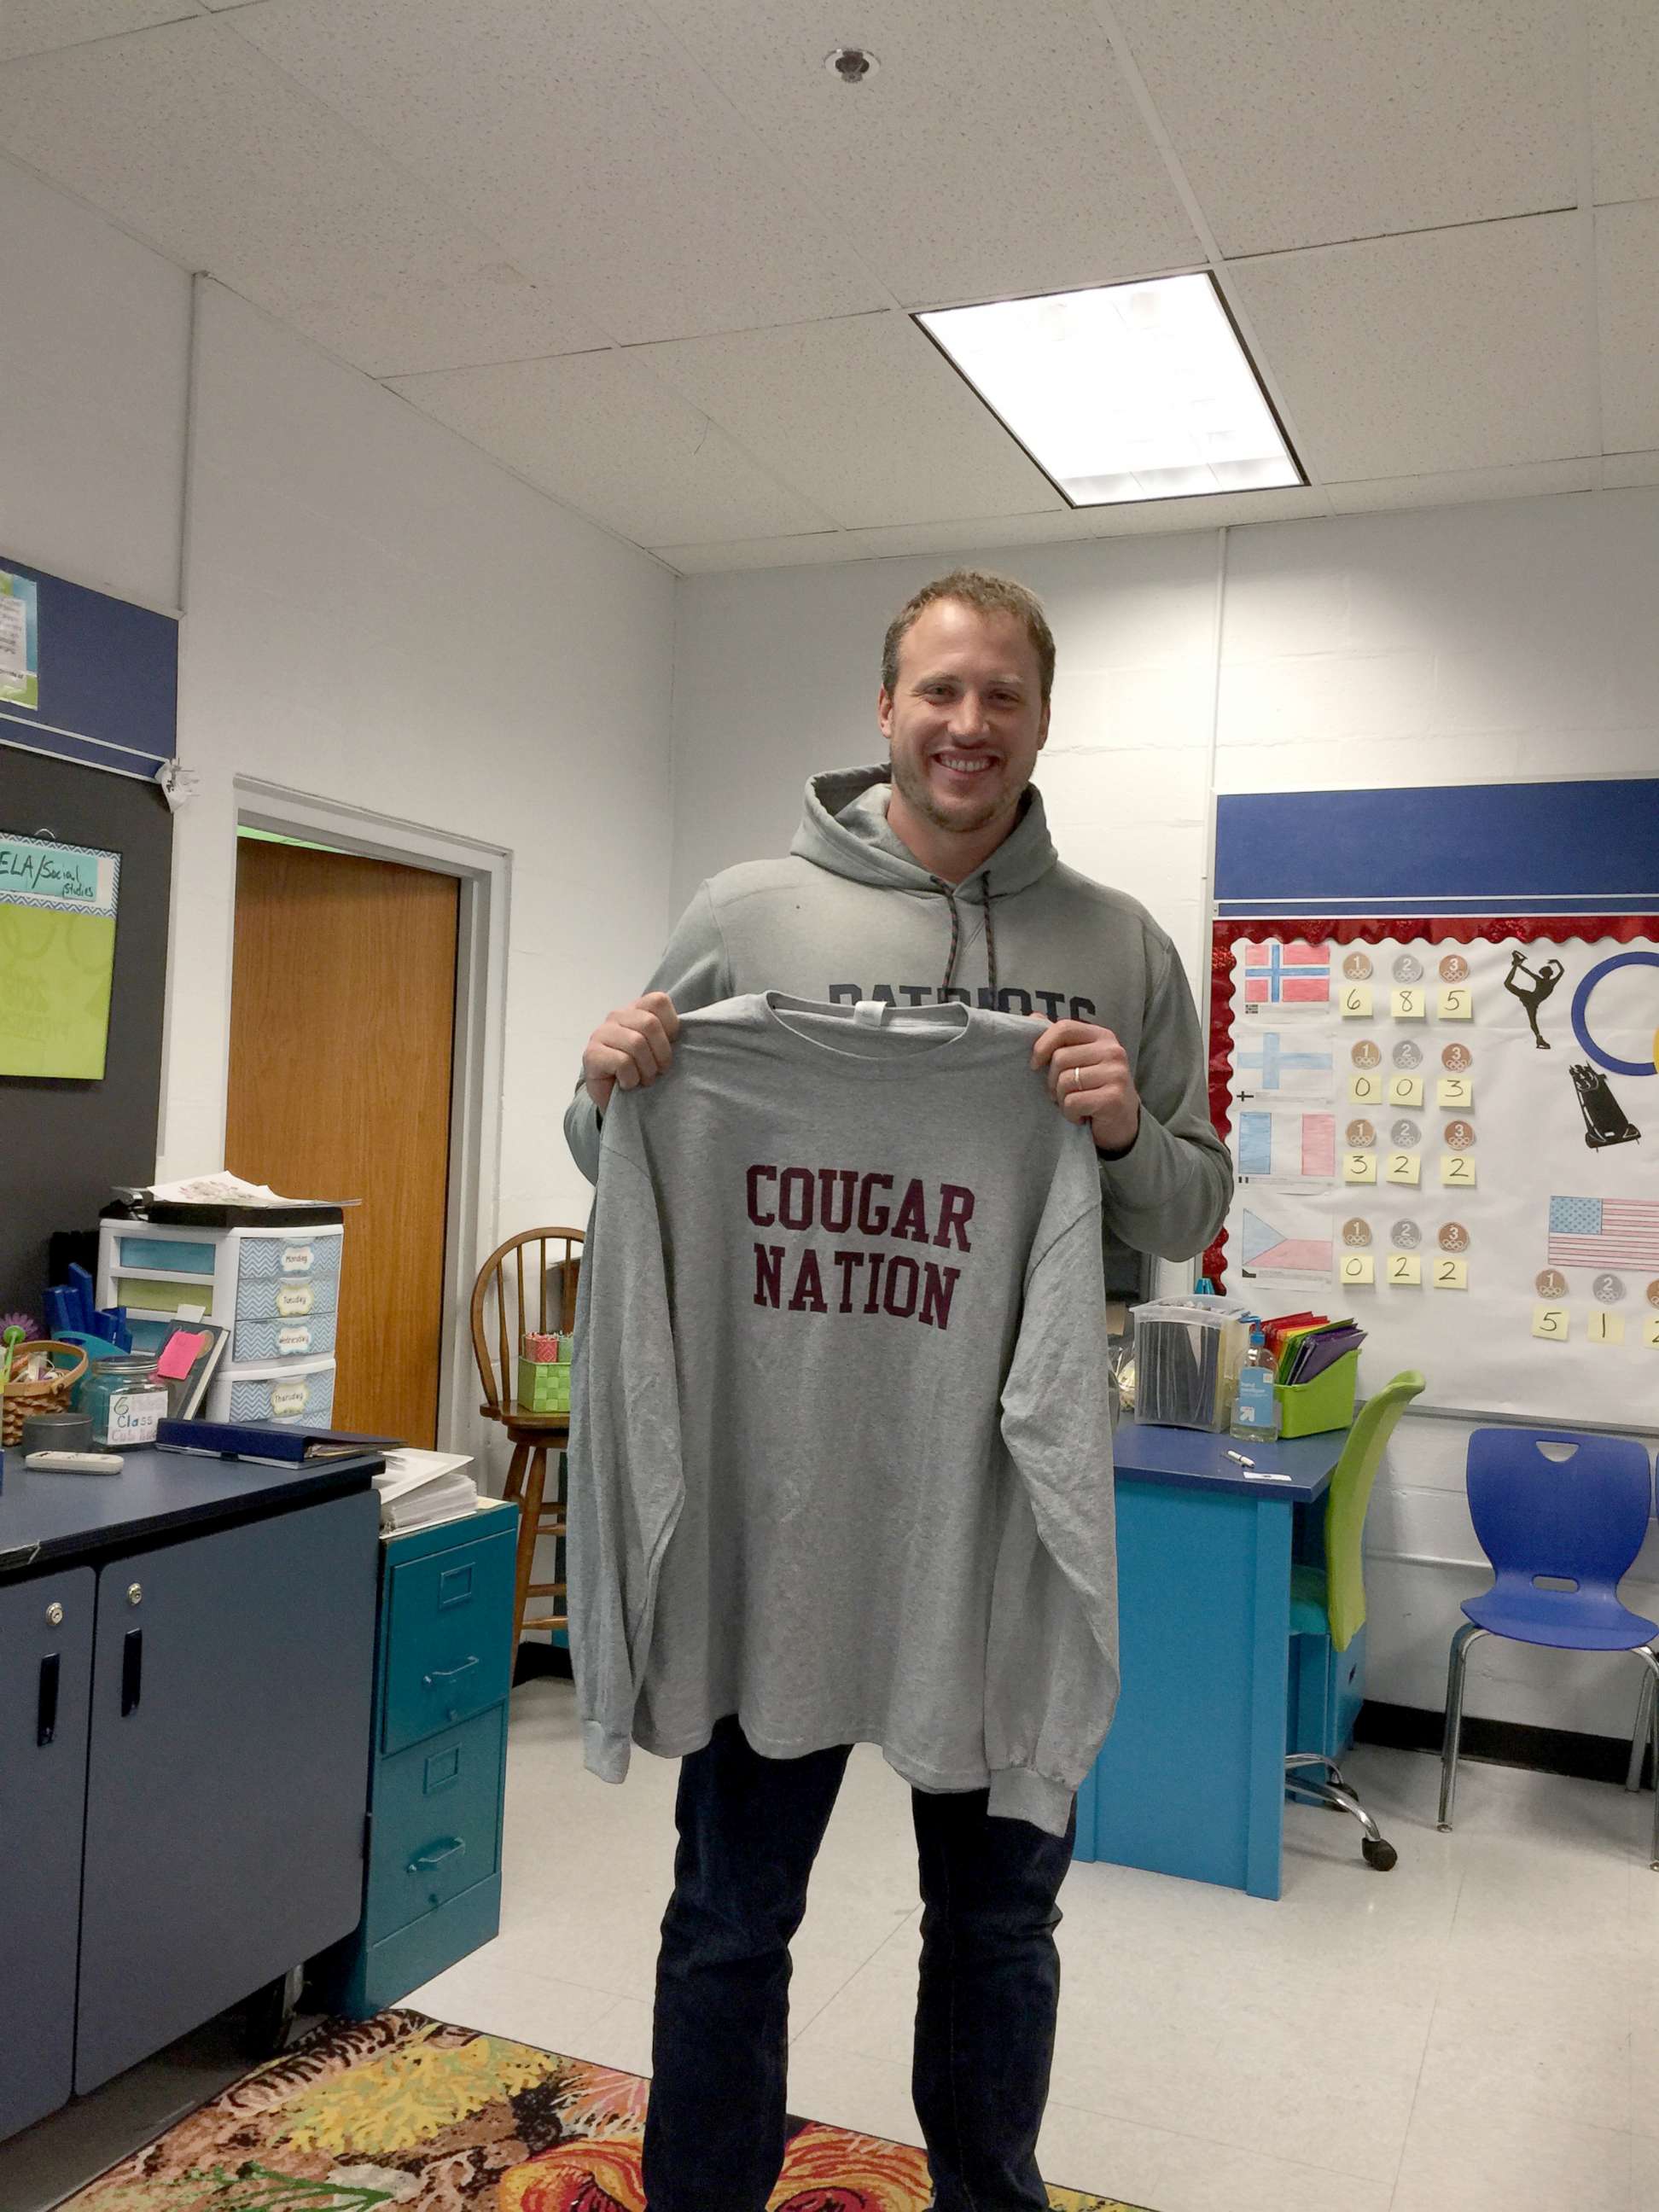 PHOTO: New England Patriots player Nate Solder visited West Brookfield Elementary School in Massachusetts, March 2, 2018, after two students were killed.